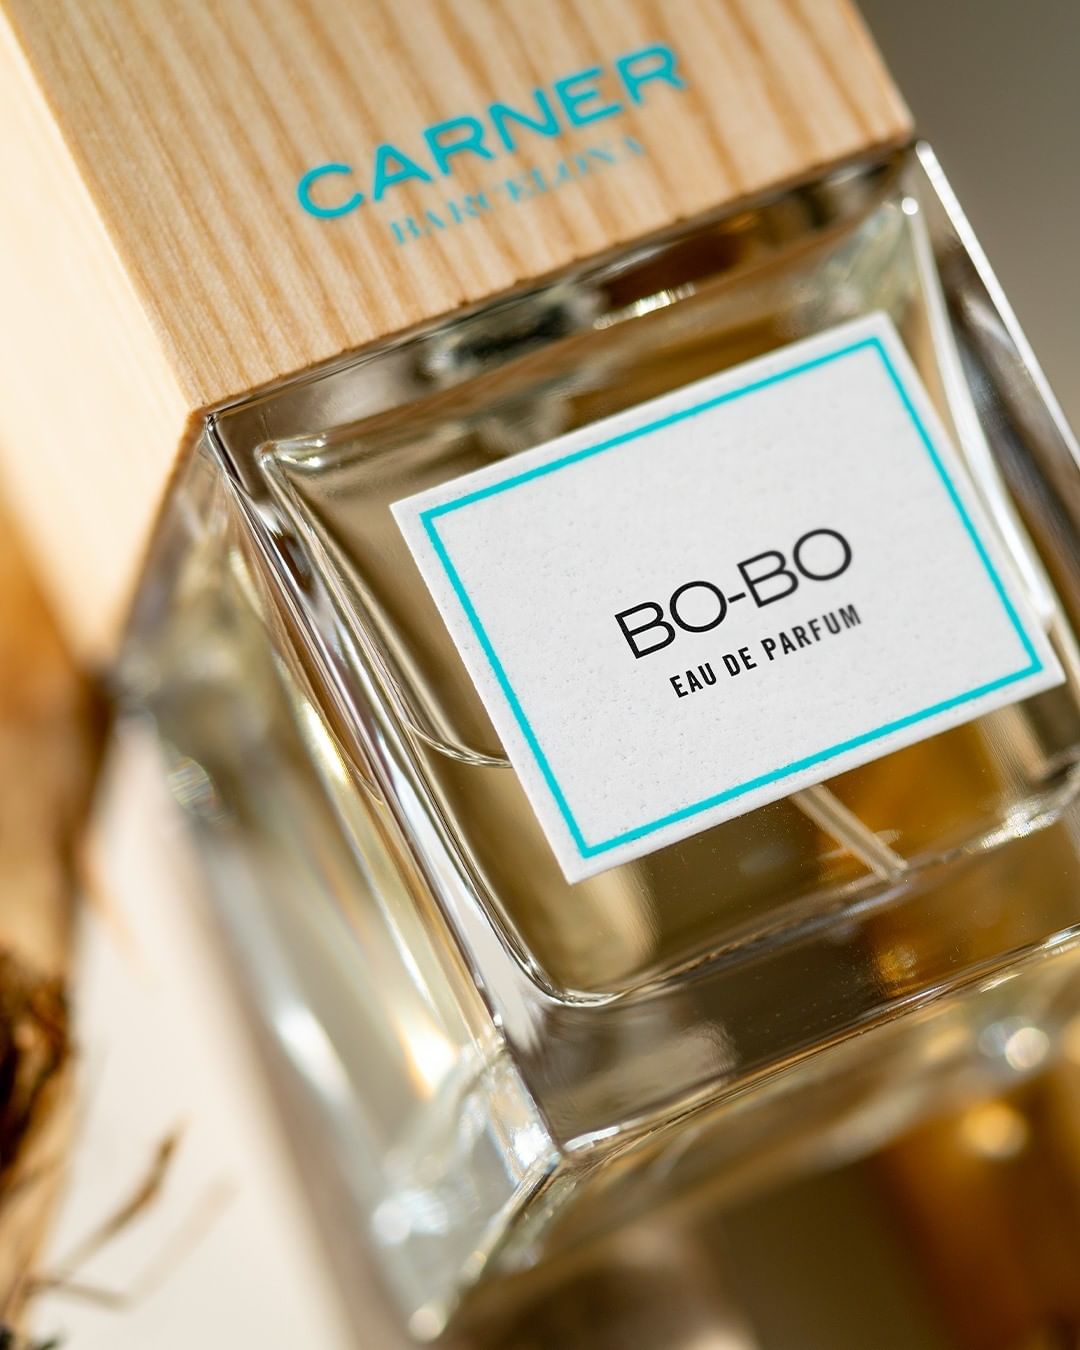 CARNER BARCELONA • Perfumes - Blithe and effervescent, Bo-Bo is a scent that captures the joyful and fanciful soul of the Mediterranean 🍊
·
·
·
#freshcollection #bobo #inspiration #carnerbarcelona #ca...